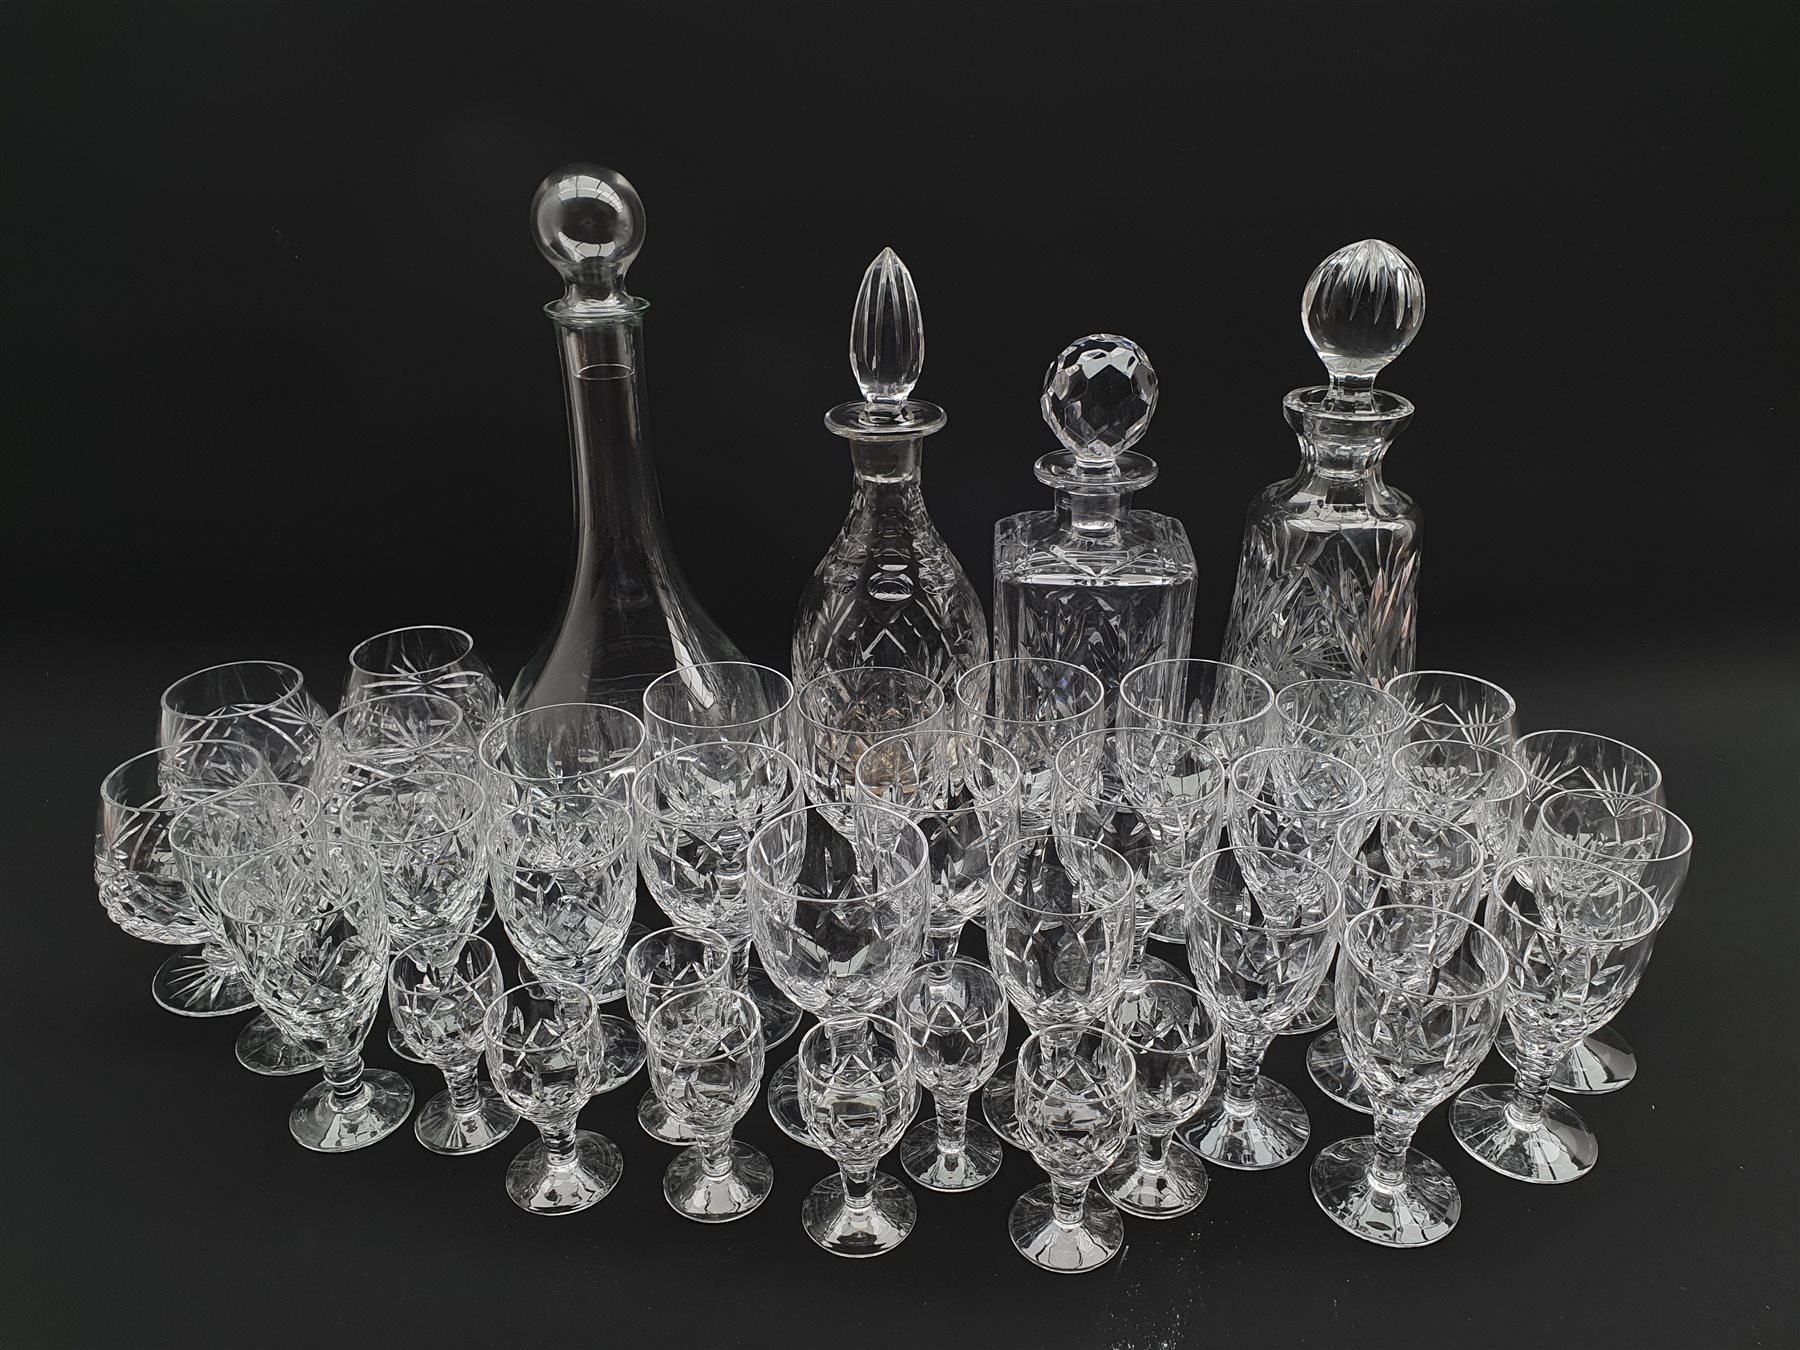 Part set of Stuart crystal table glass (25) other cut glass and four decanters - Image 2 of 2